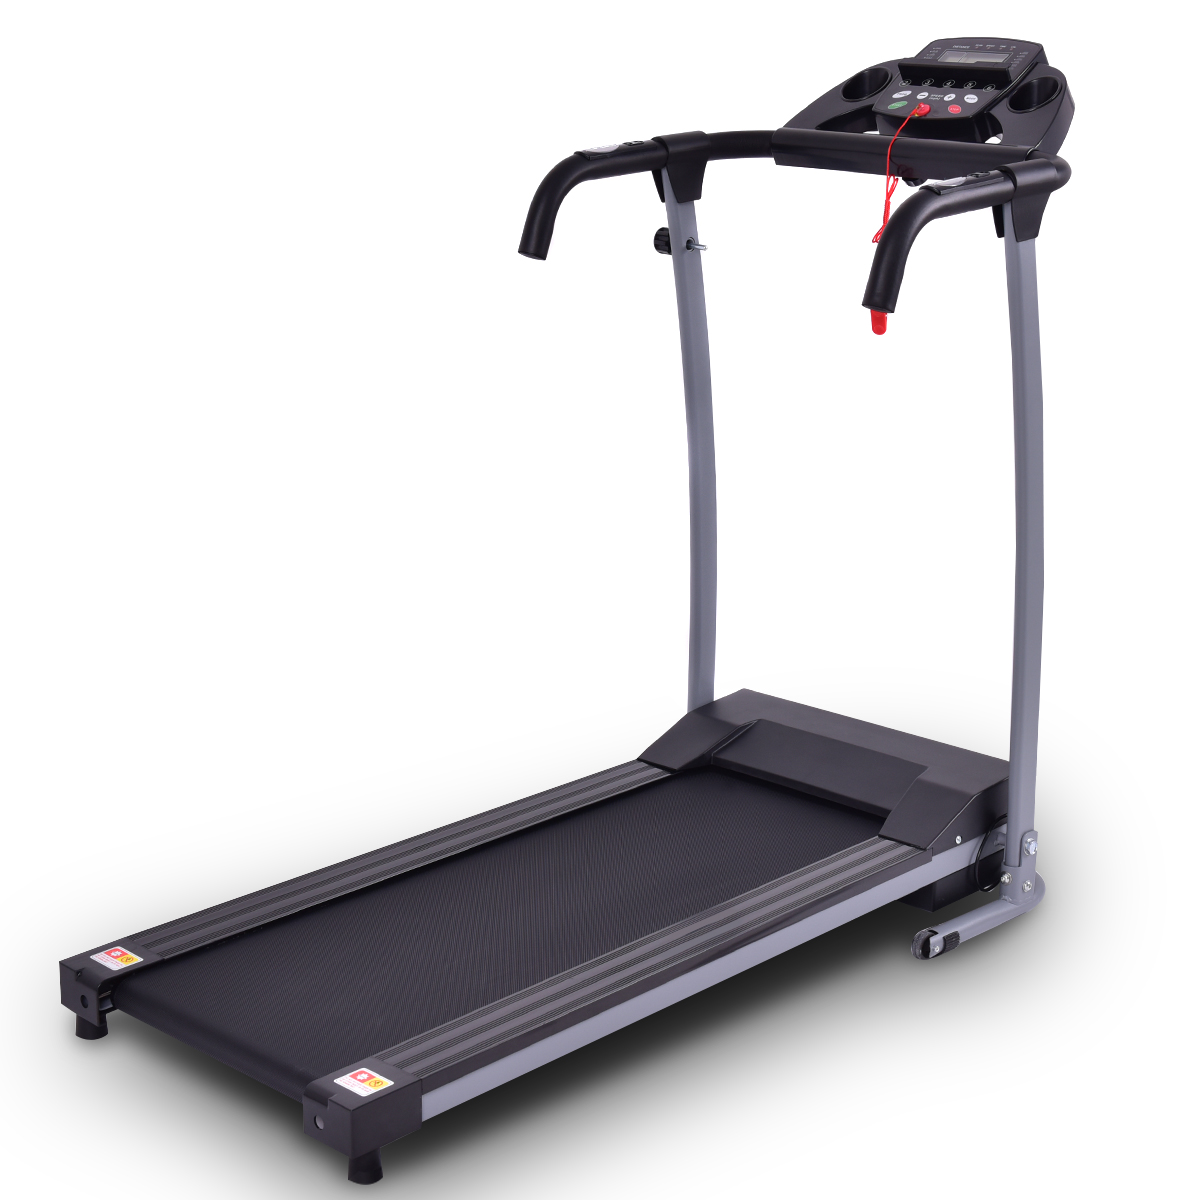 Topbuy 800W Folding Electric Exercise Treadmill Fitness Running Machine - image 1 of 6